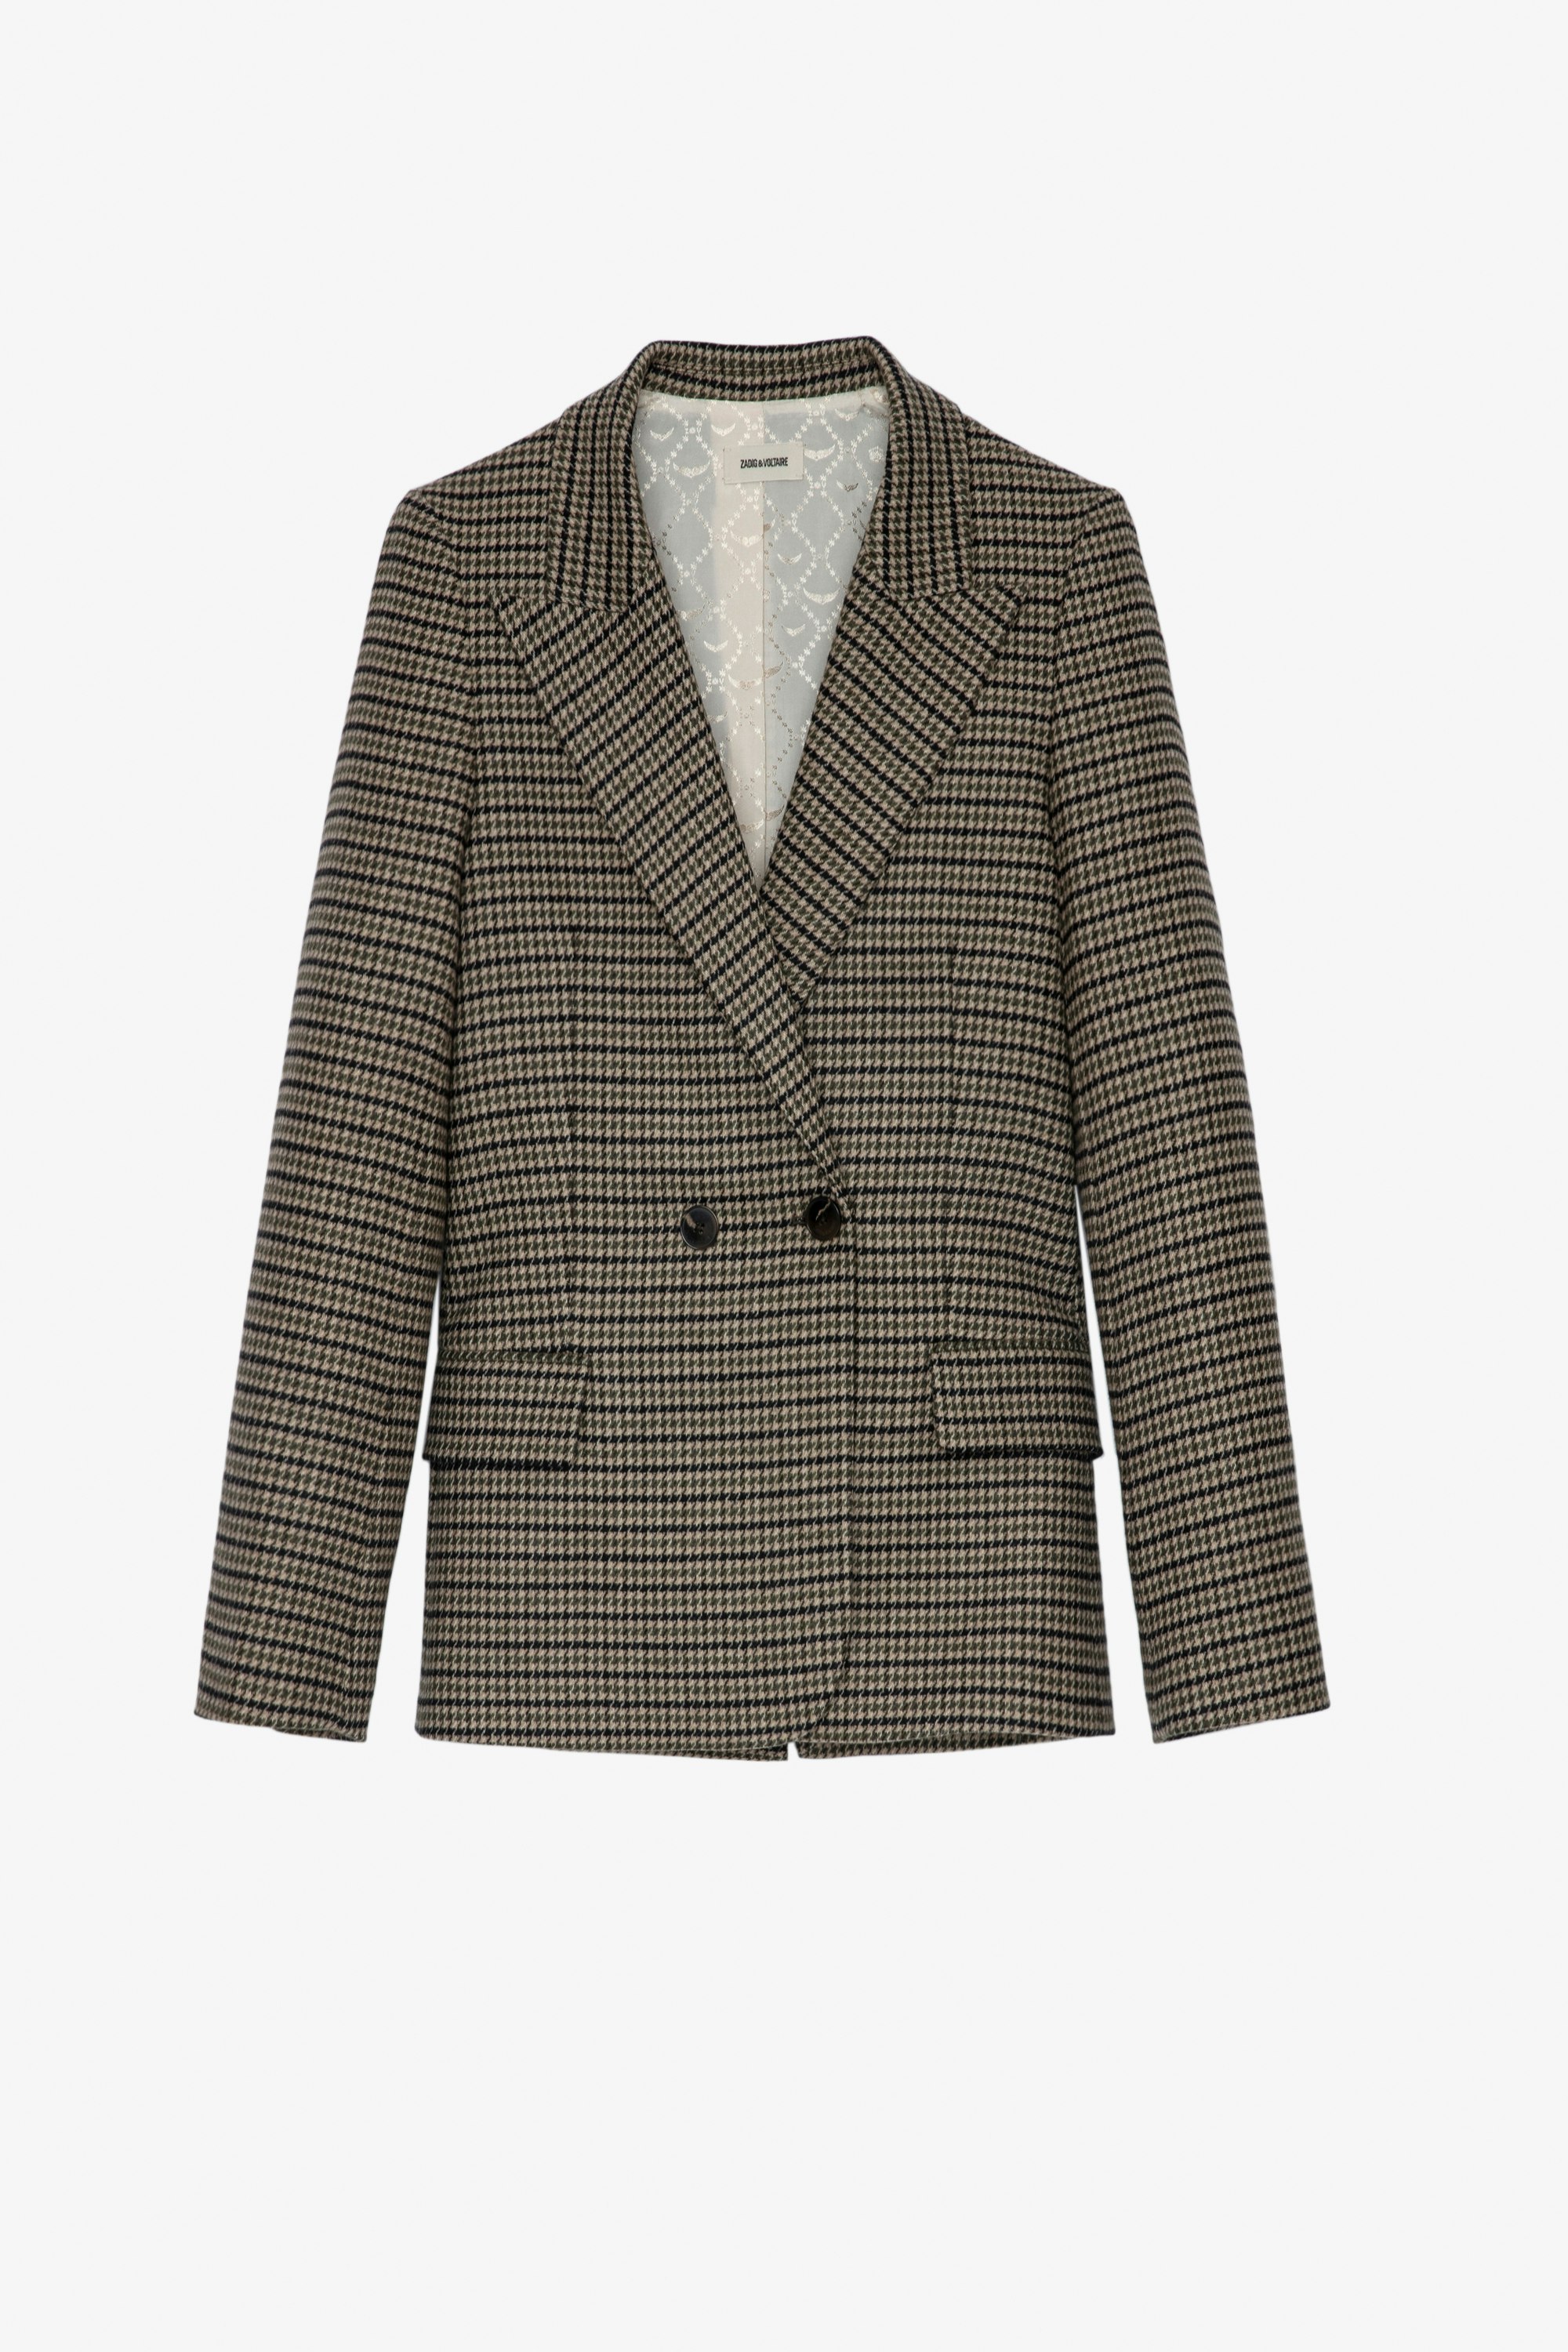 Visit Jacket Women’s khaki tailored jacket in houndstooth check with star patches on the elbows